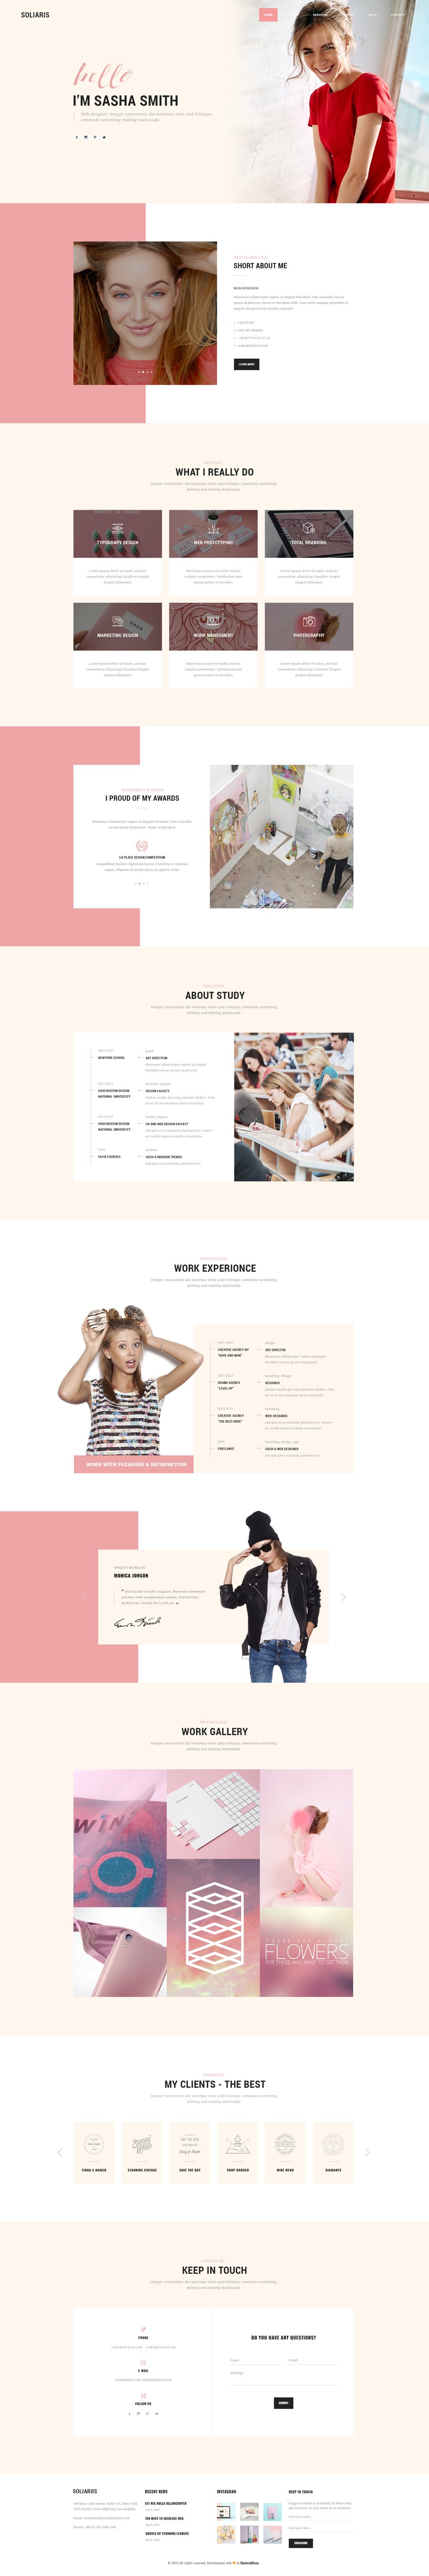 Soliaris - 18 One Page Bootstrap Templates - 3